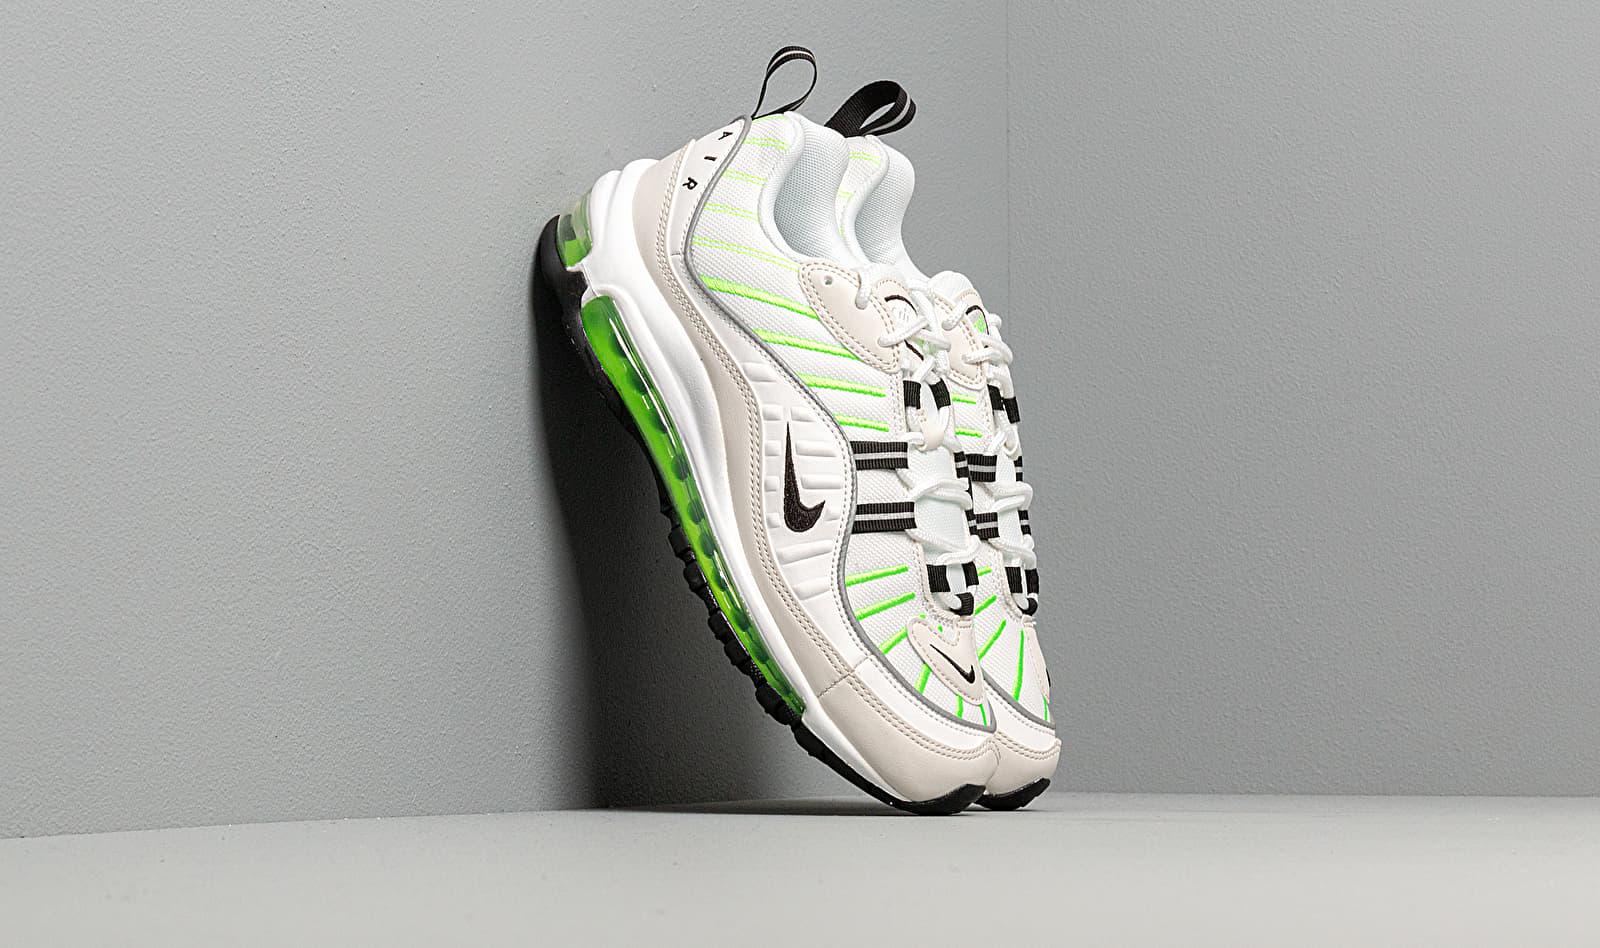 Nike Air Max 98 Trainers in Green | Lyst